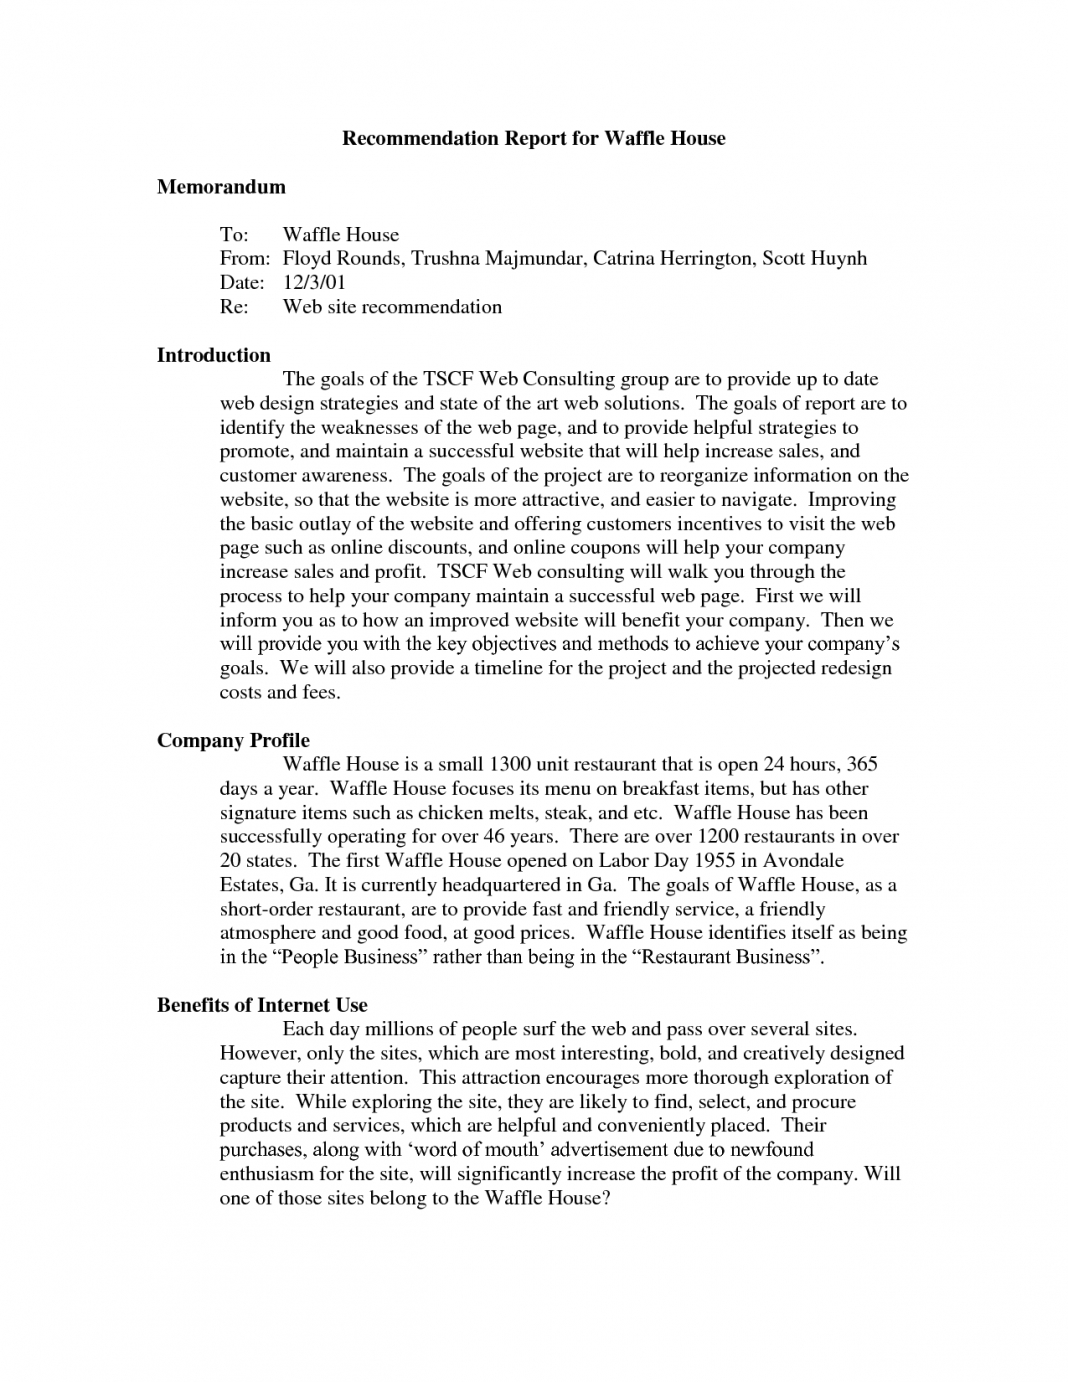 Recommendation Report Example Examples Internal Memo Sample Within Recommendation Report Template